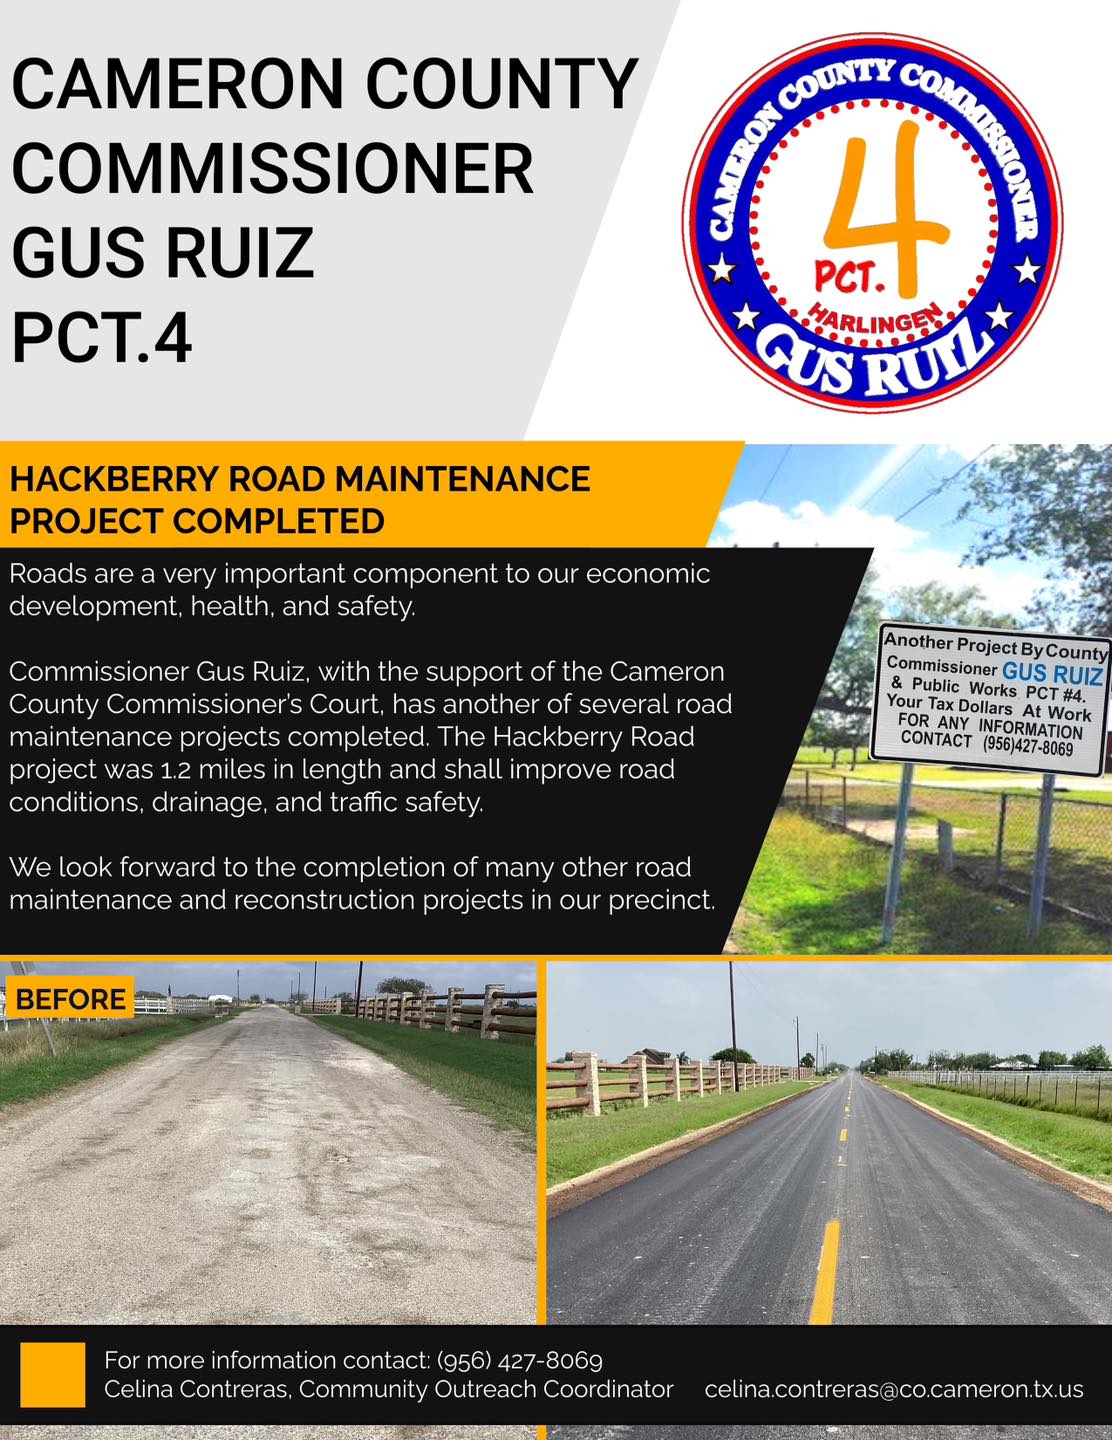 Hackberry Road Maintenance Project Completed